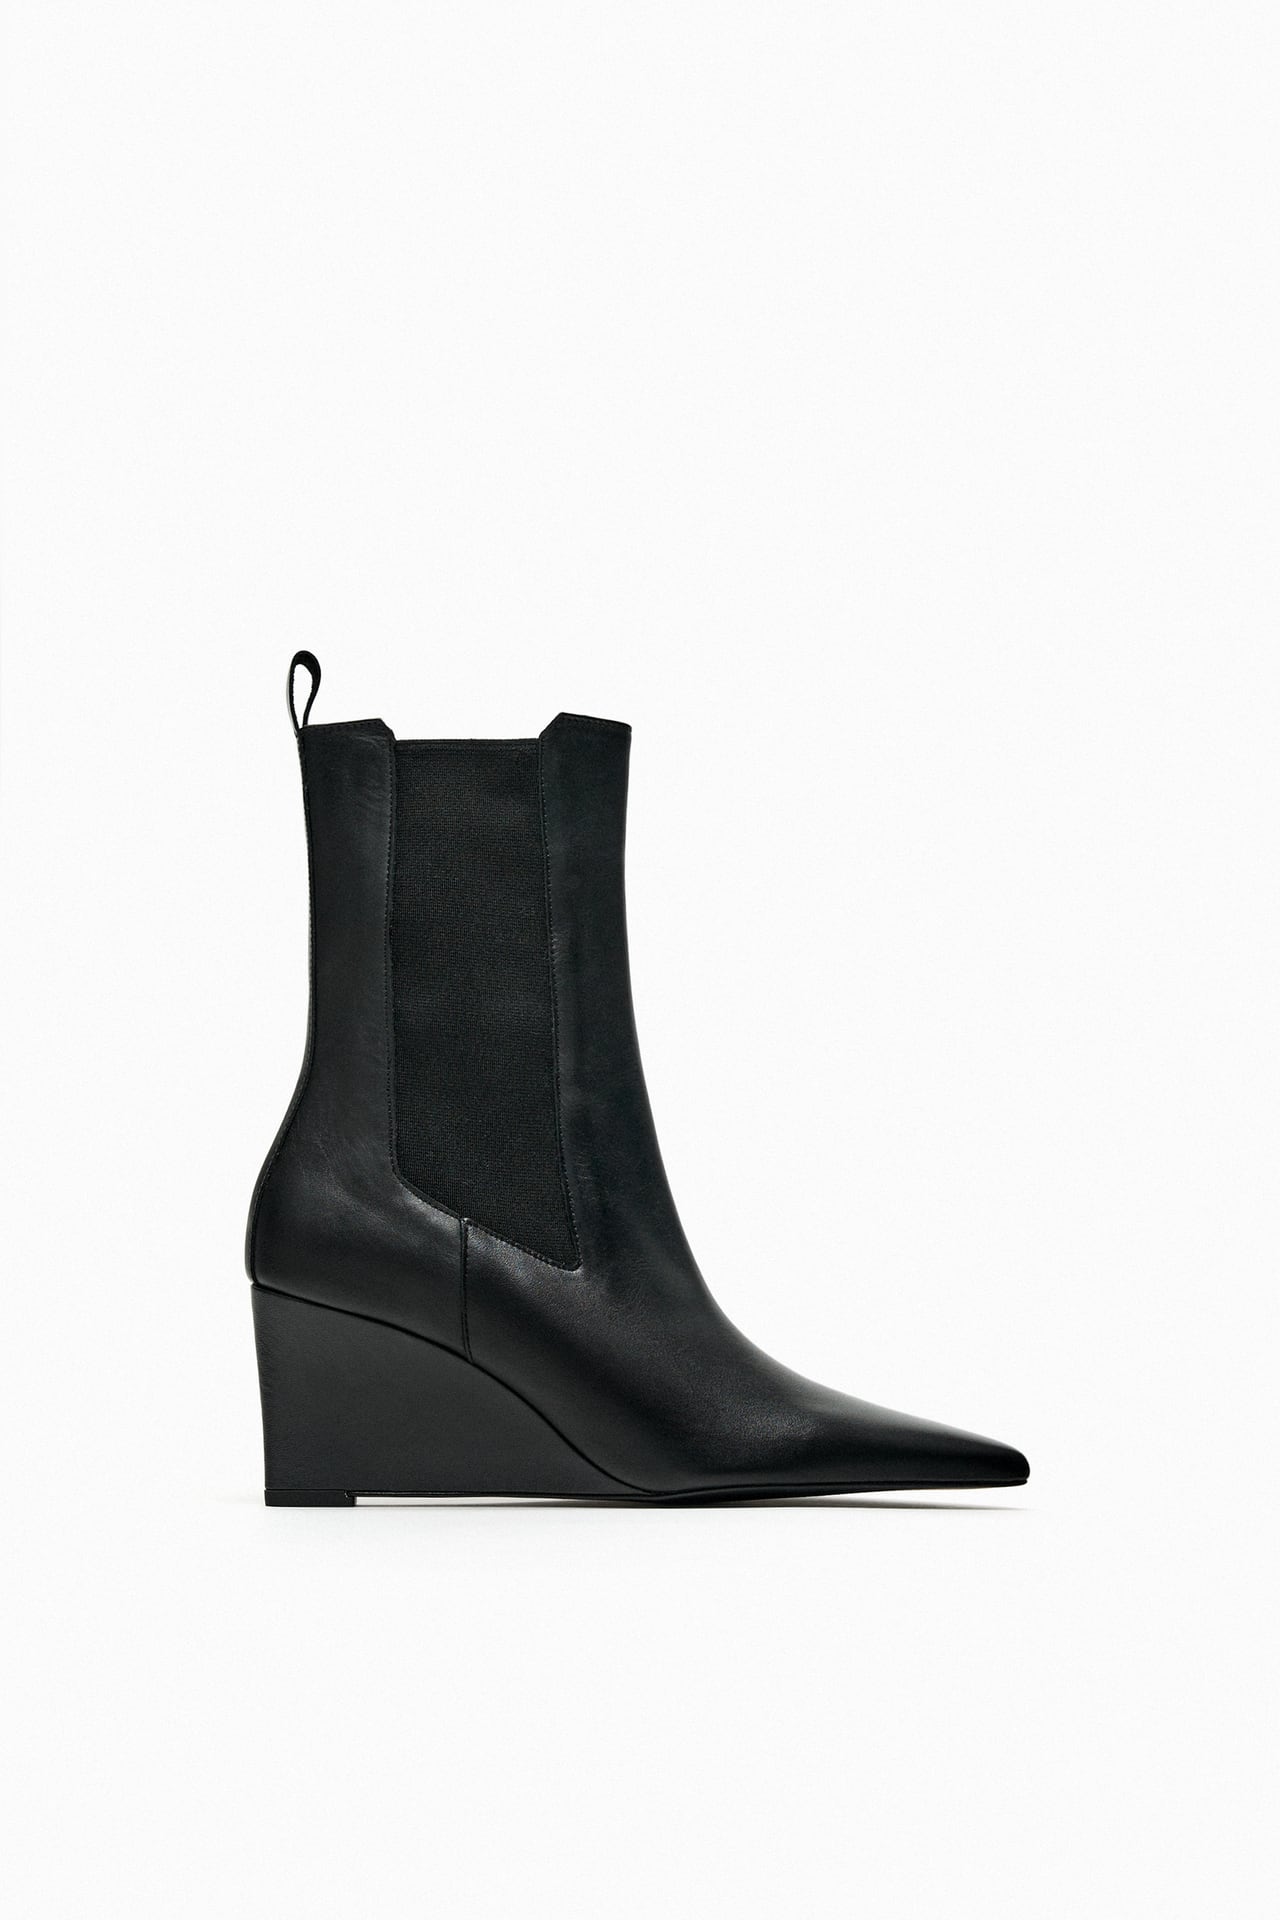 Zara Leather wedge ankle boots
